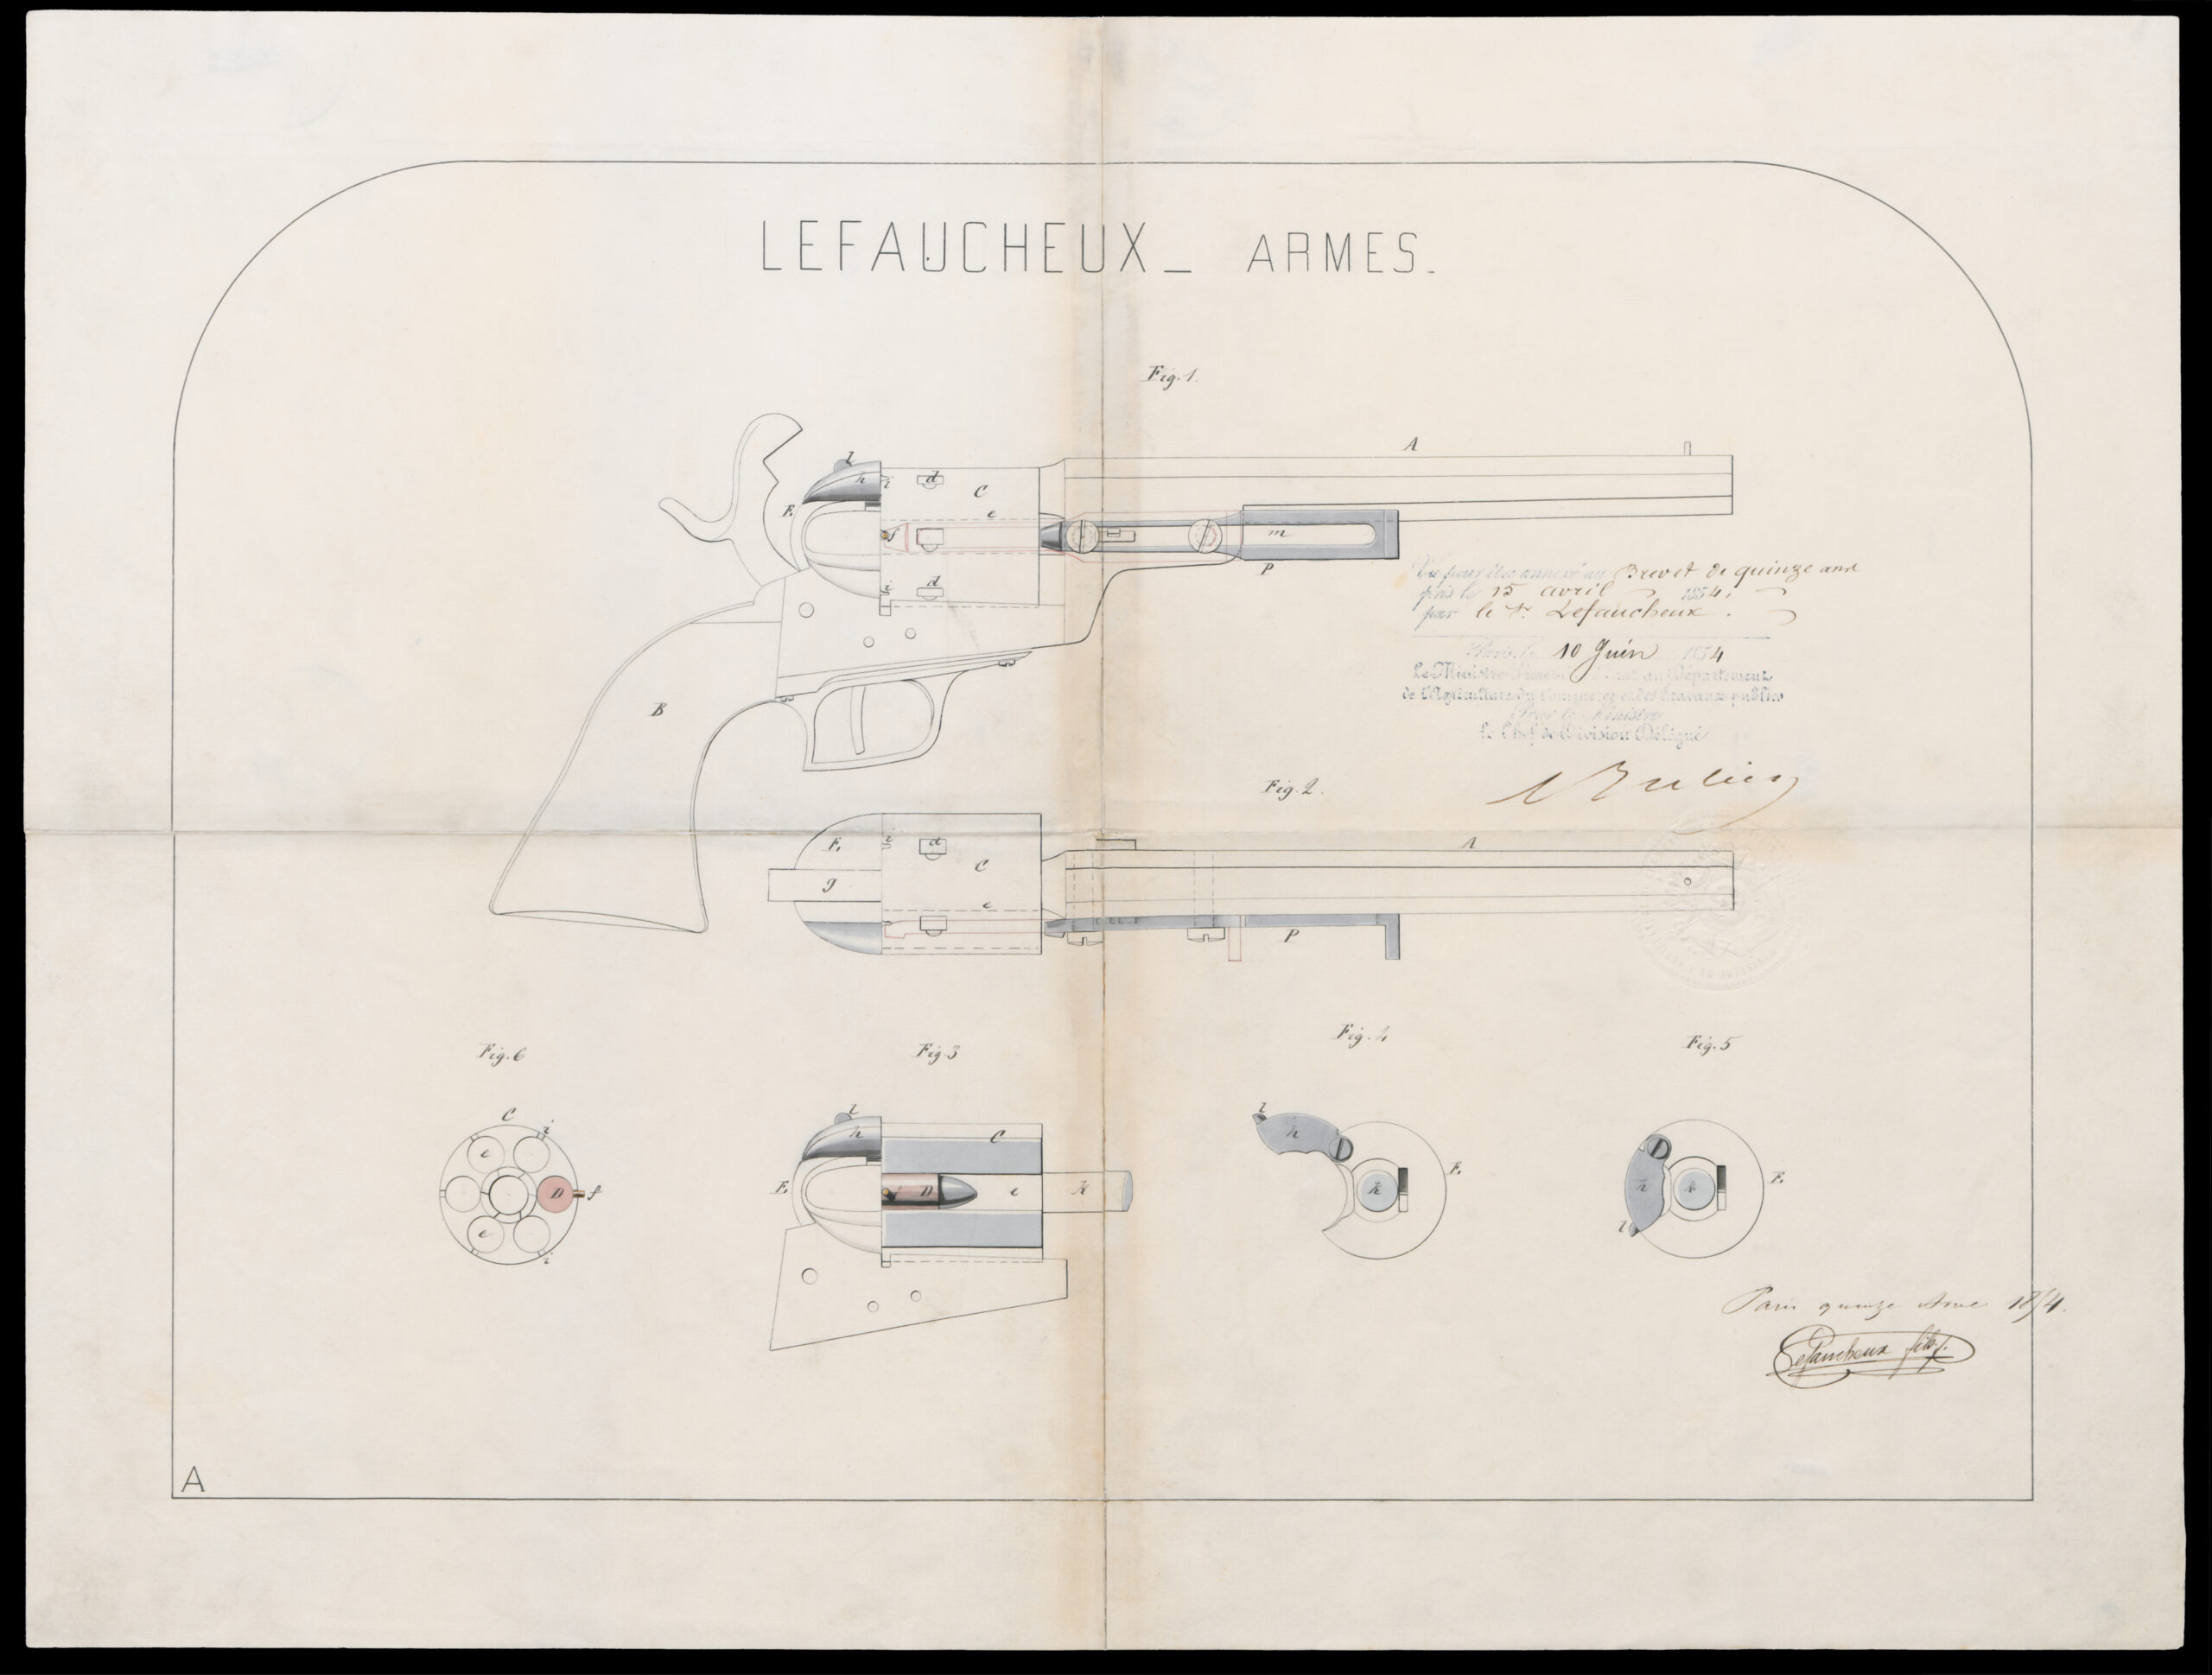 French patent 19,380 of April 15, 1854